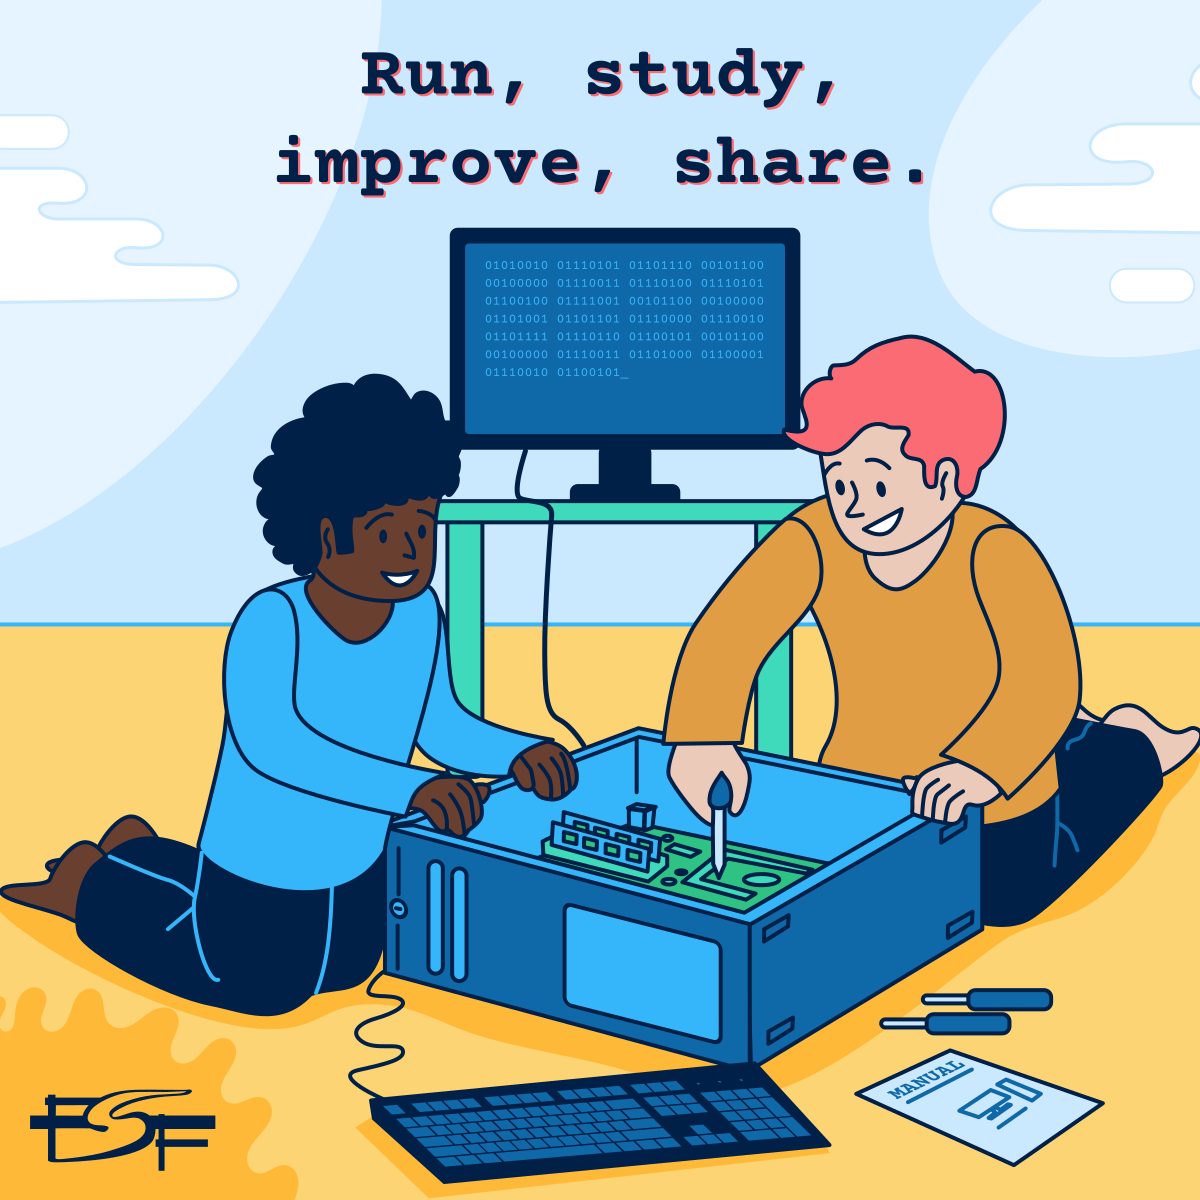 Illustration of 2 people working on a computer